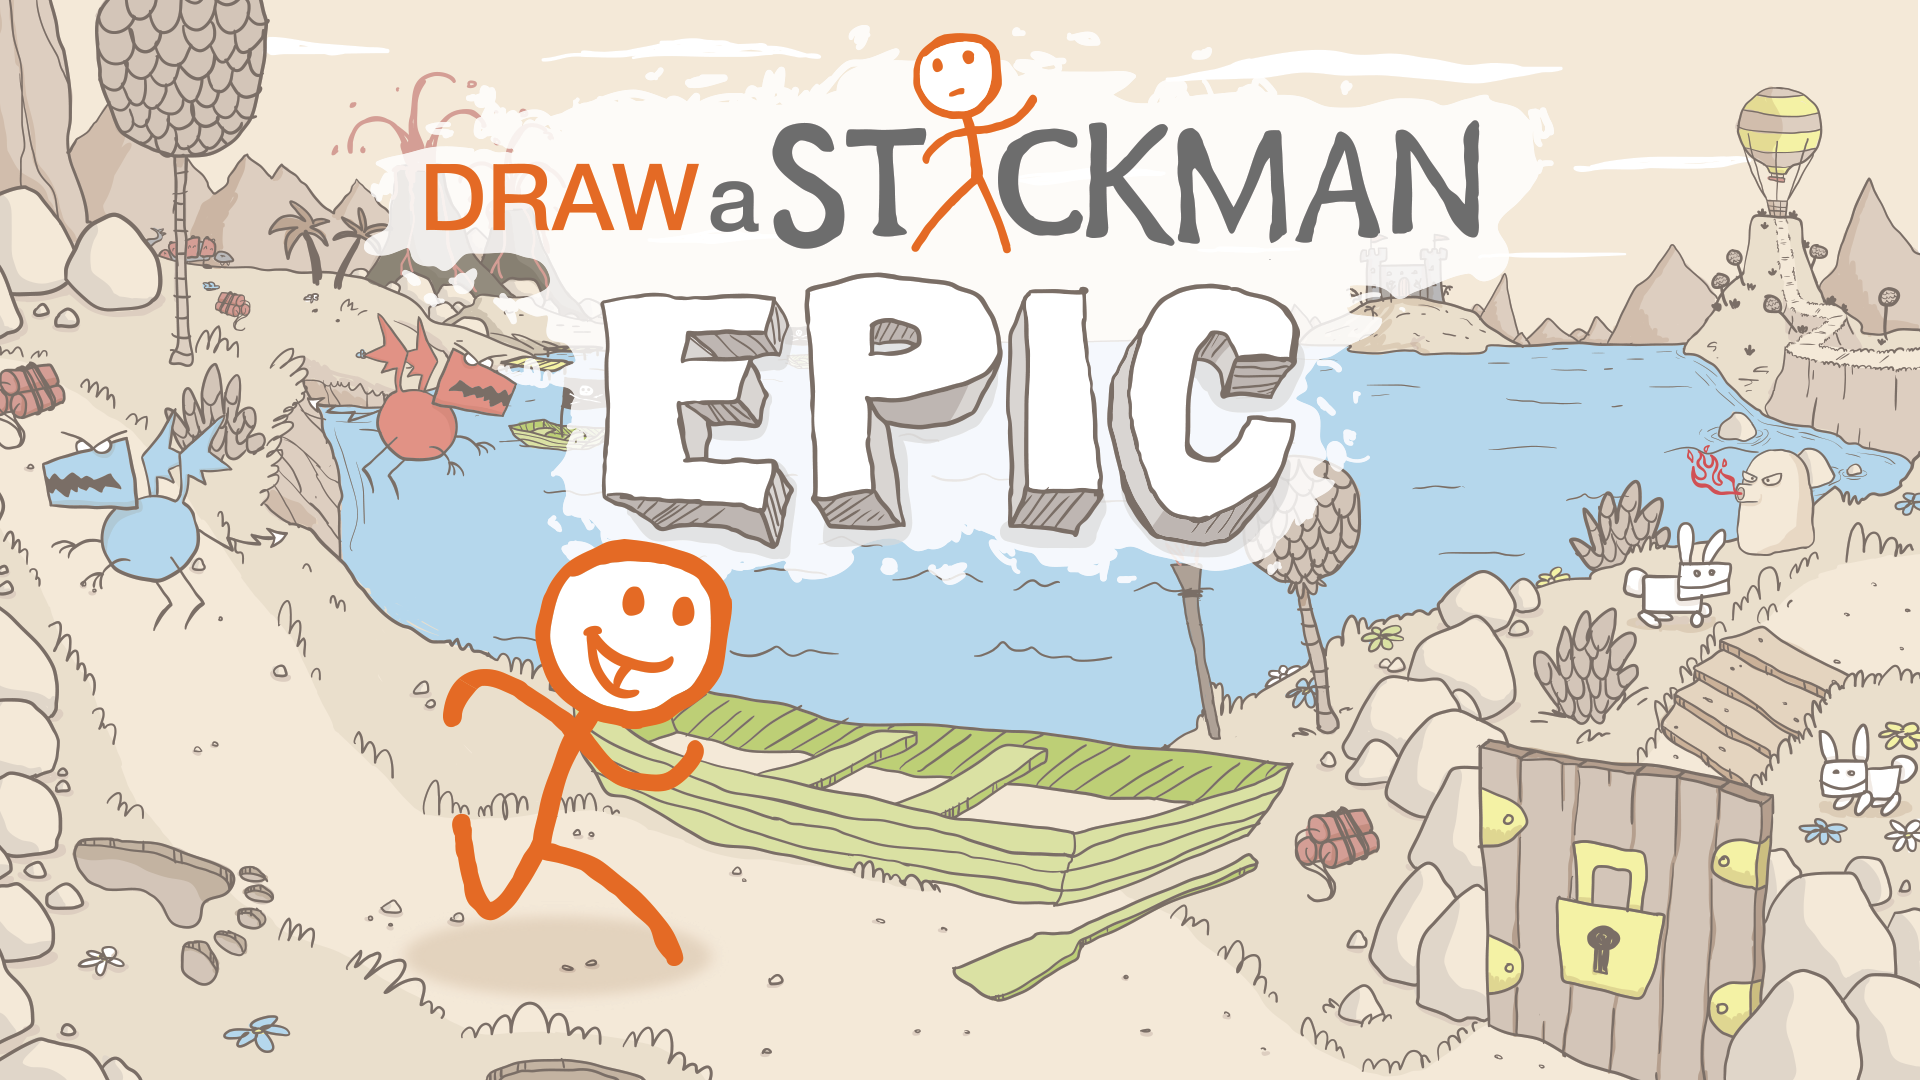 download the new for android Draw a Stickman: EPIC Free